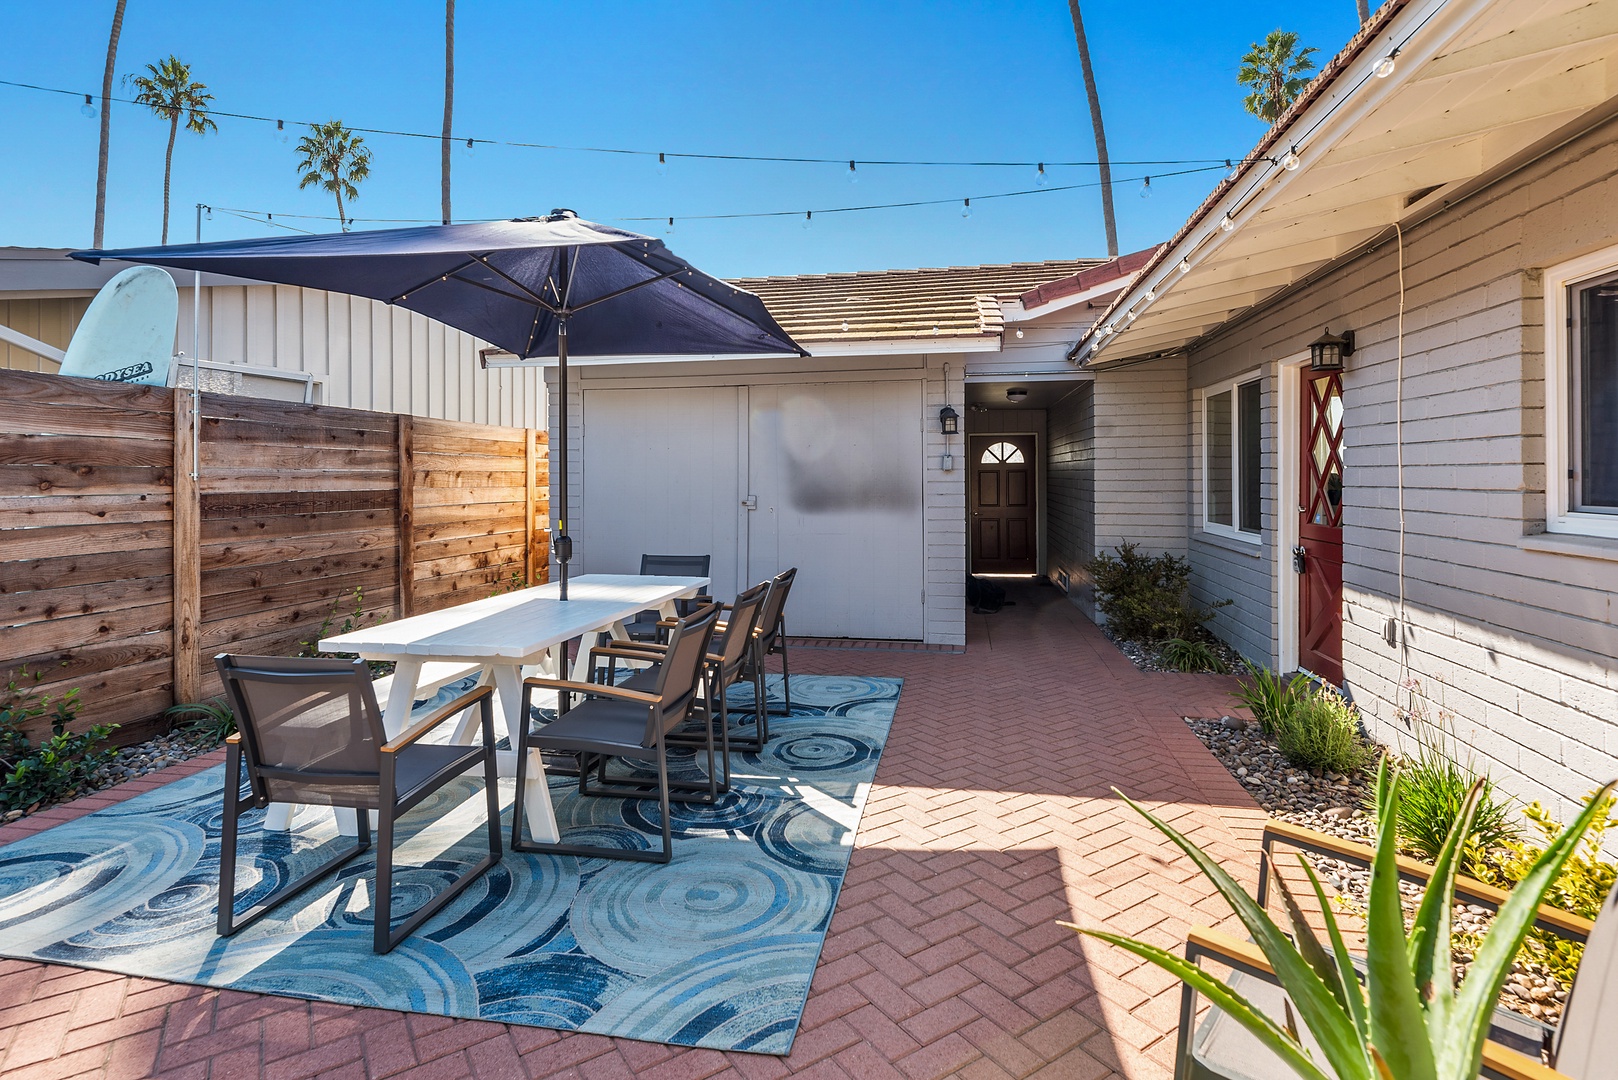 La Jolla Vacation Rentals, Hemingway's Beach House - Beautiful outdoor space with dining table